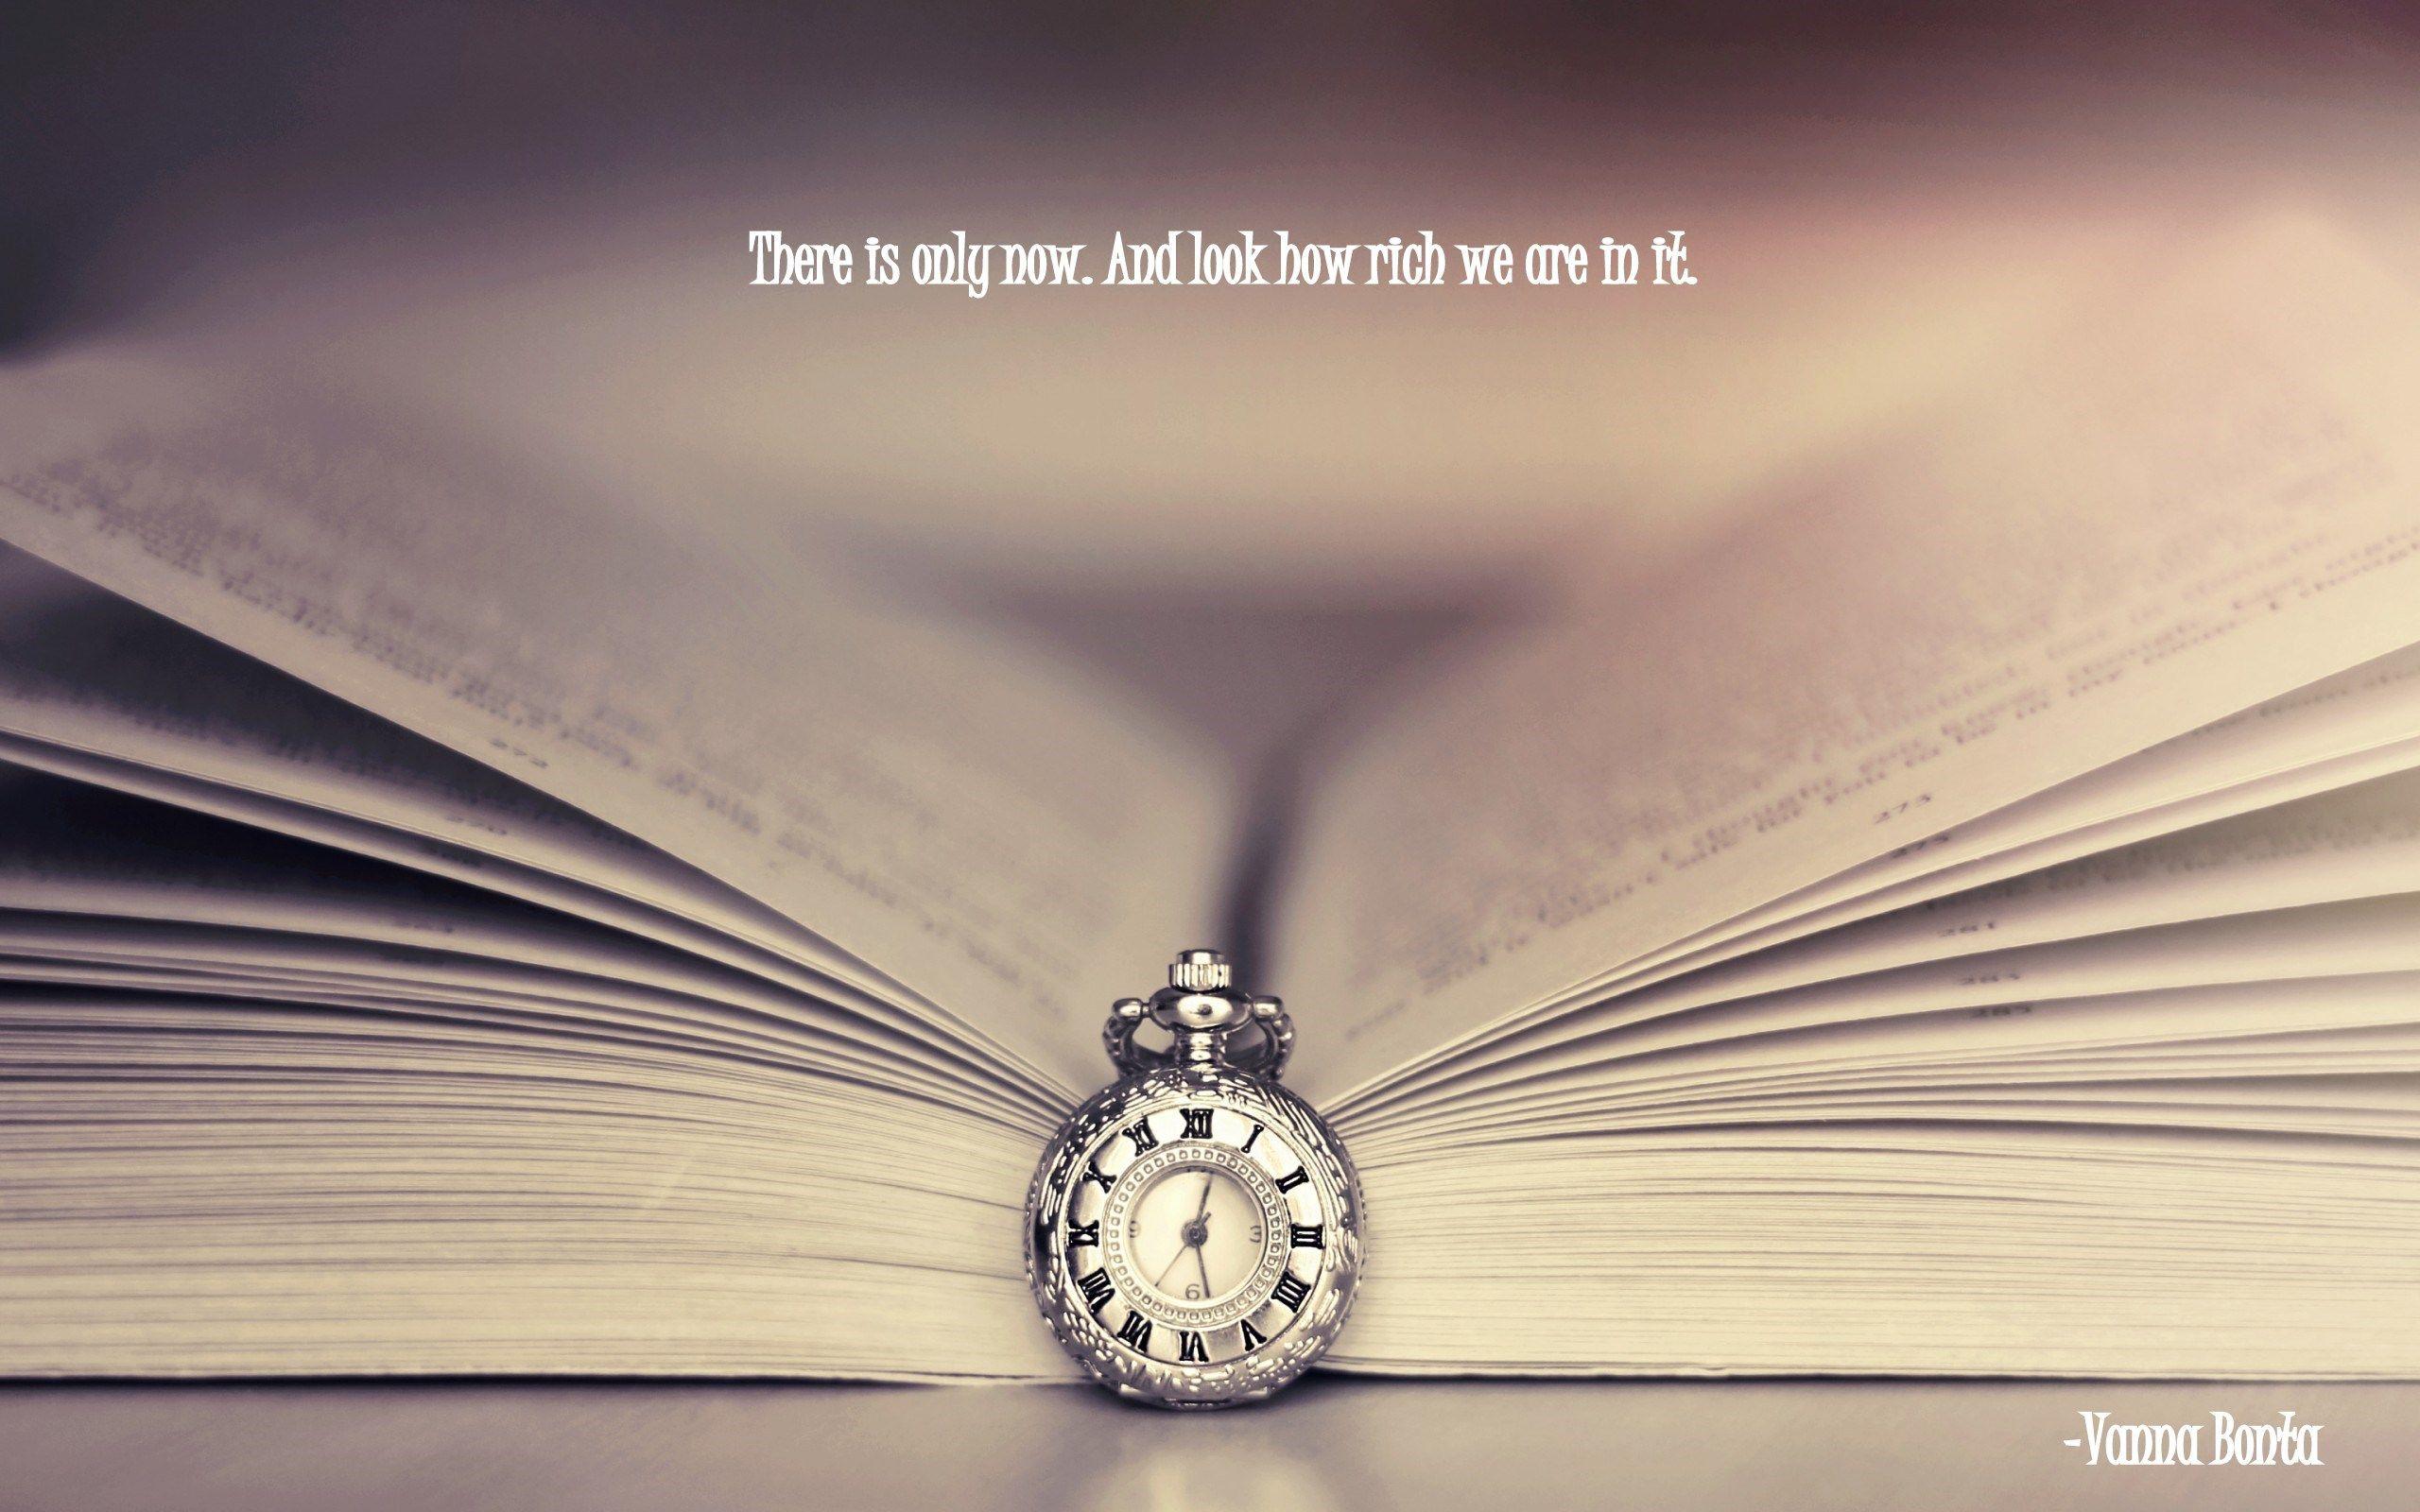 Time Management Quotes & HD Wallpaper for Bloggers